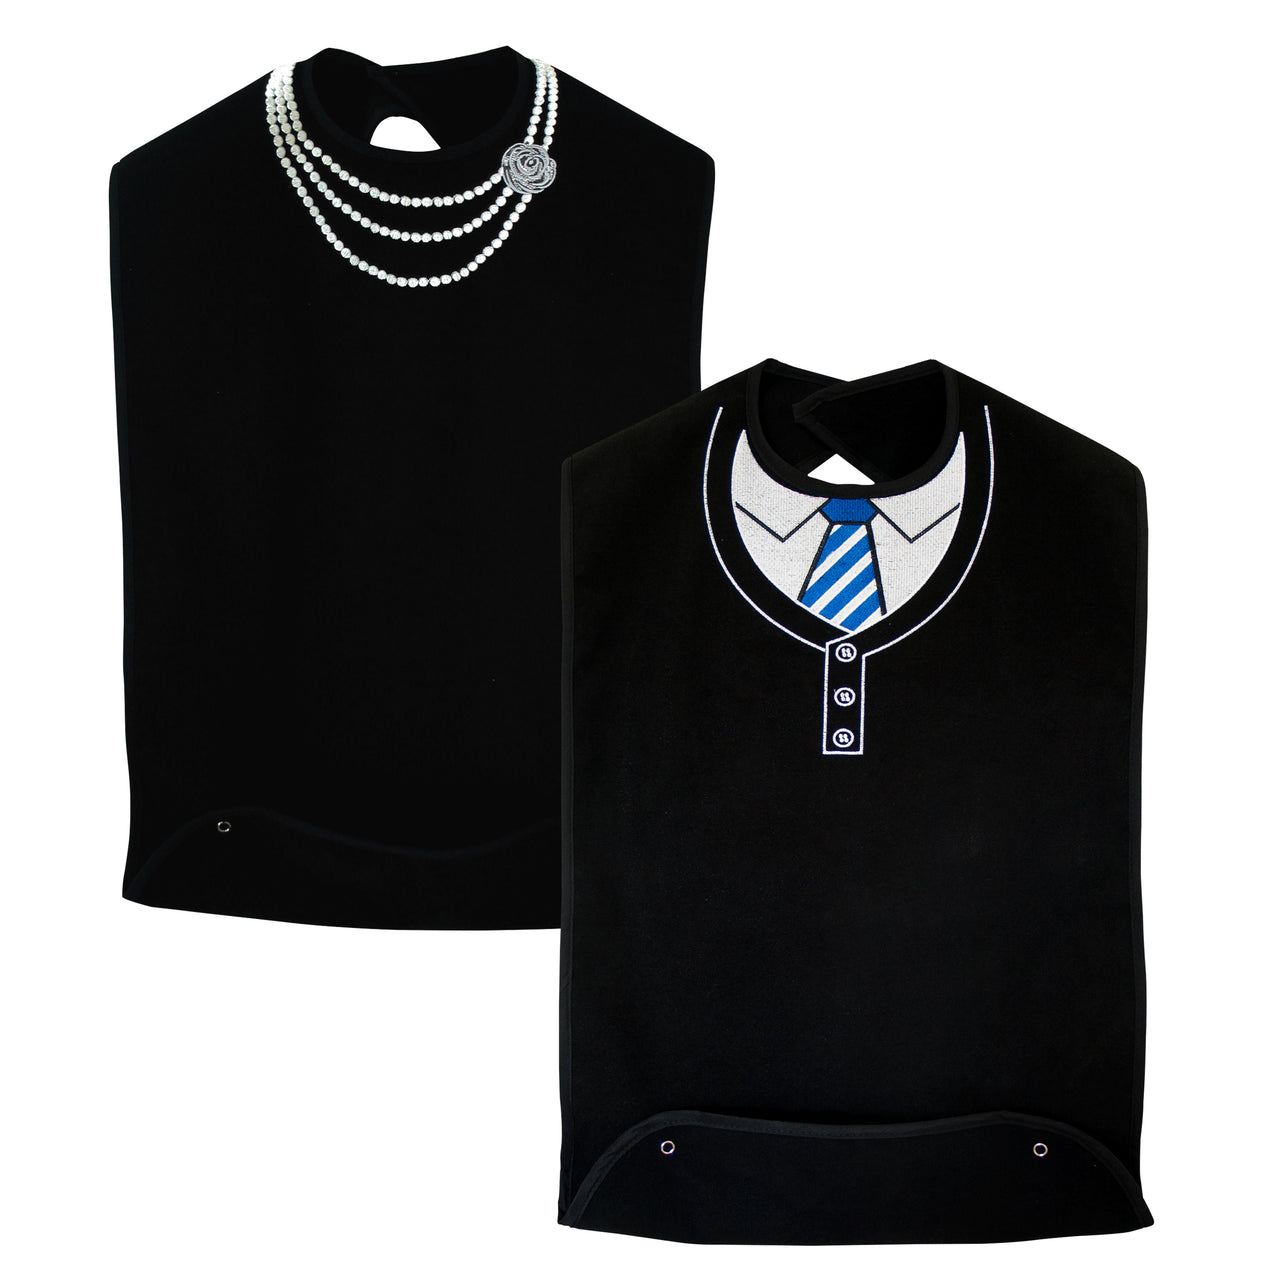 Women's Dress 'n Dine™ Pearl Necklace & Men's Sweater and Tie (2 Pack)